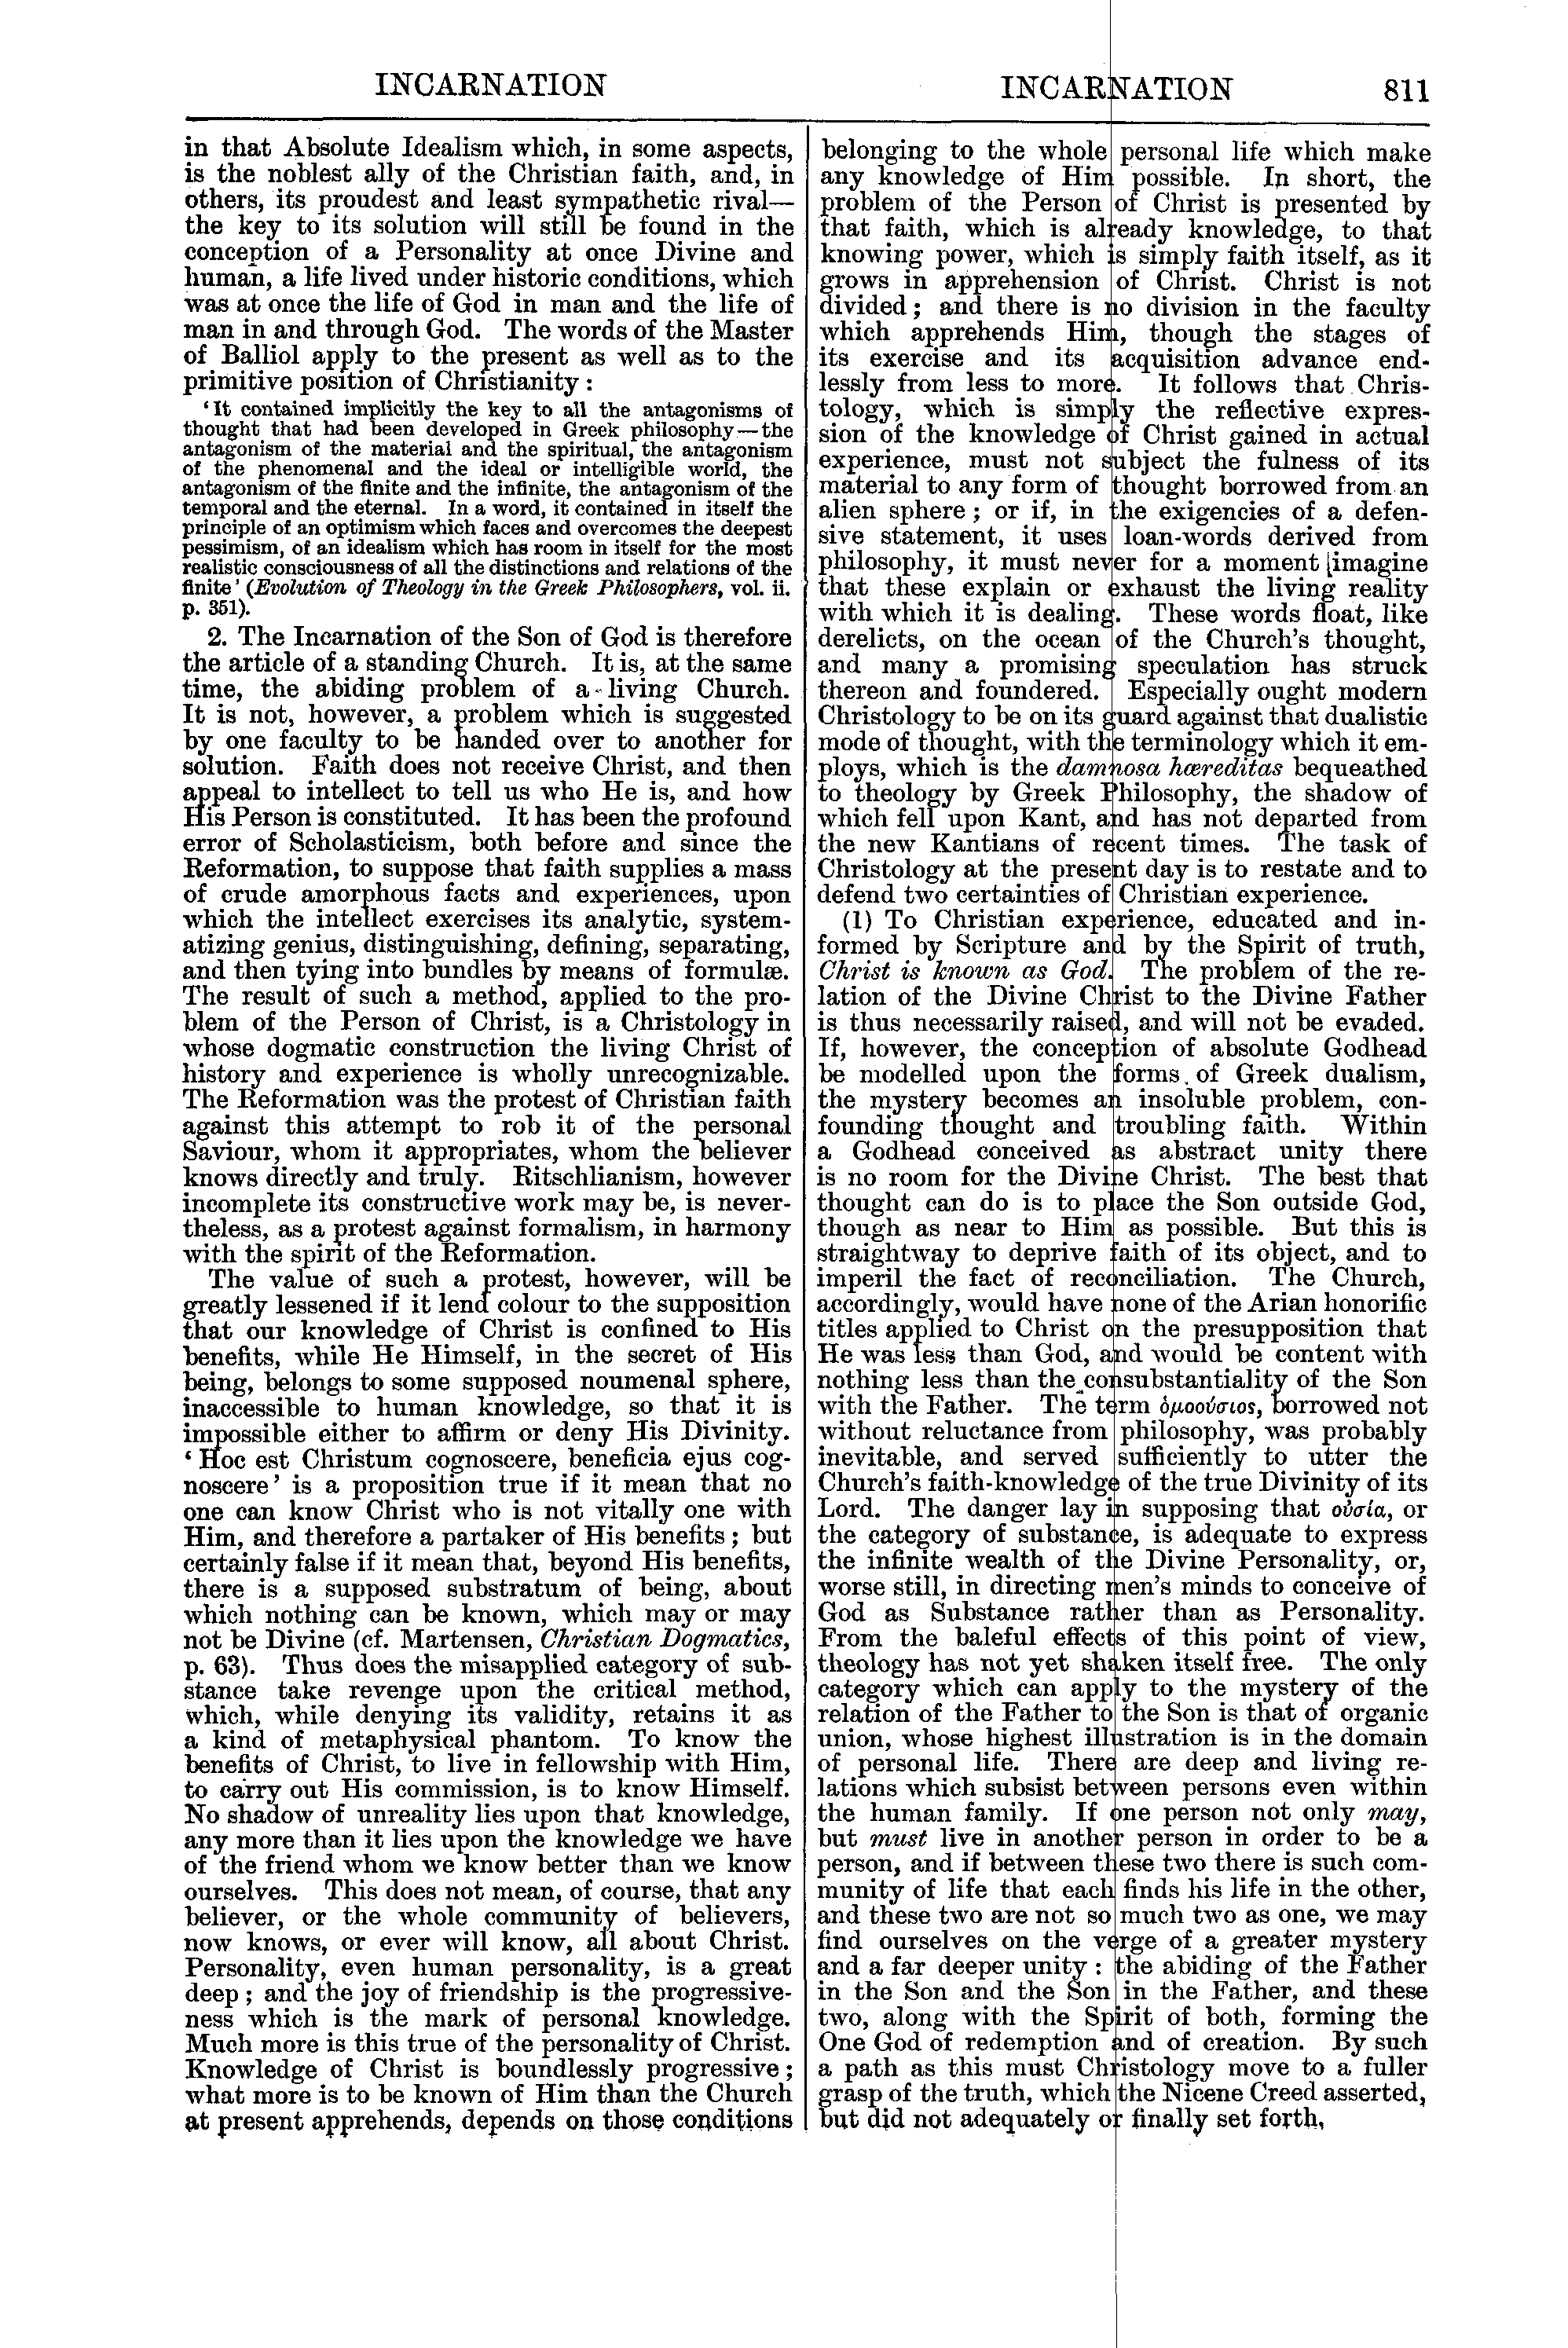 Image of page 811